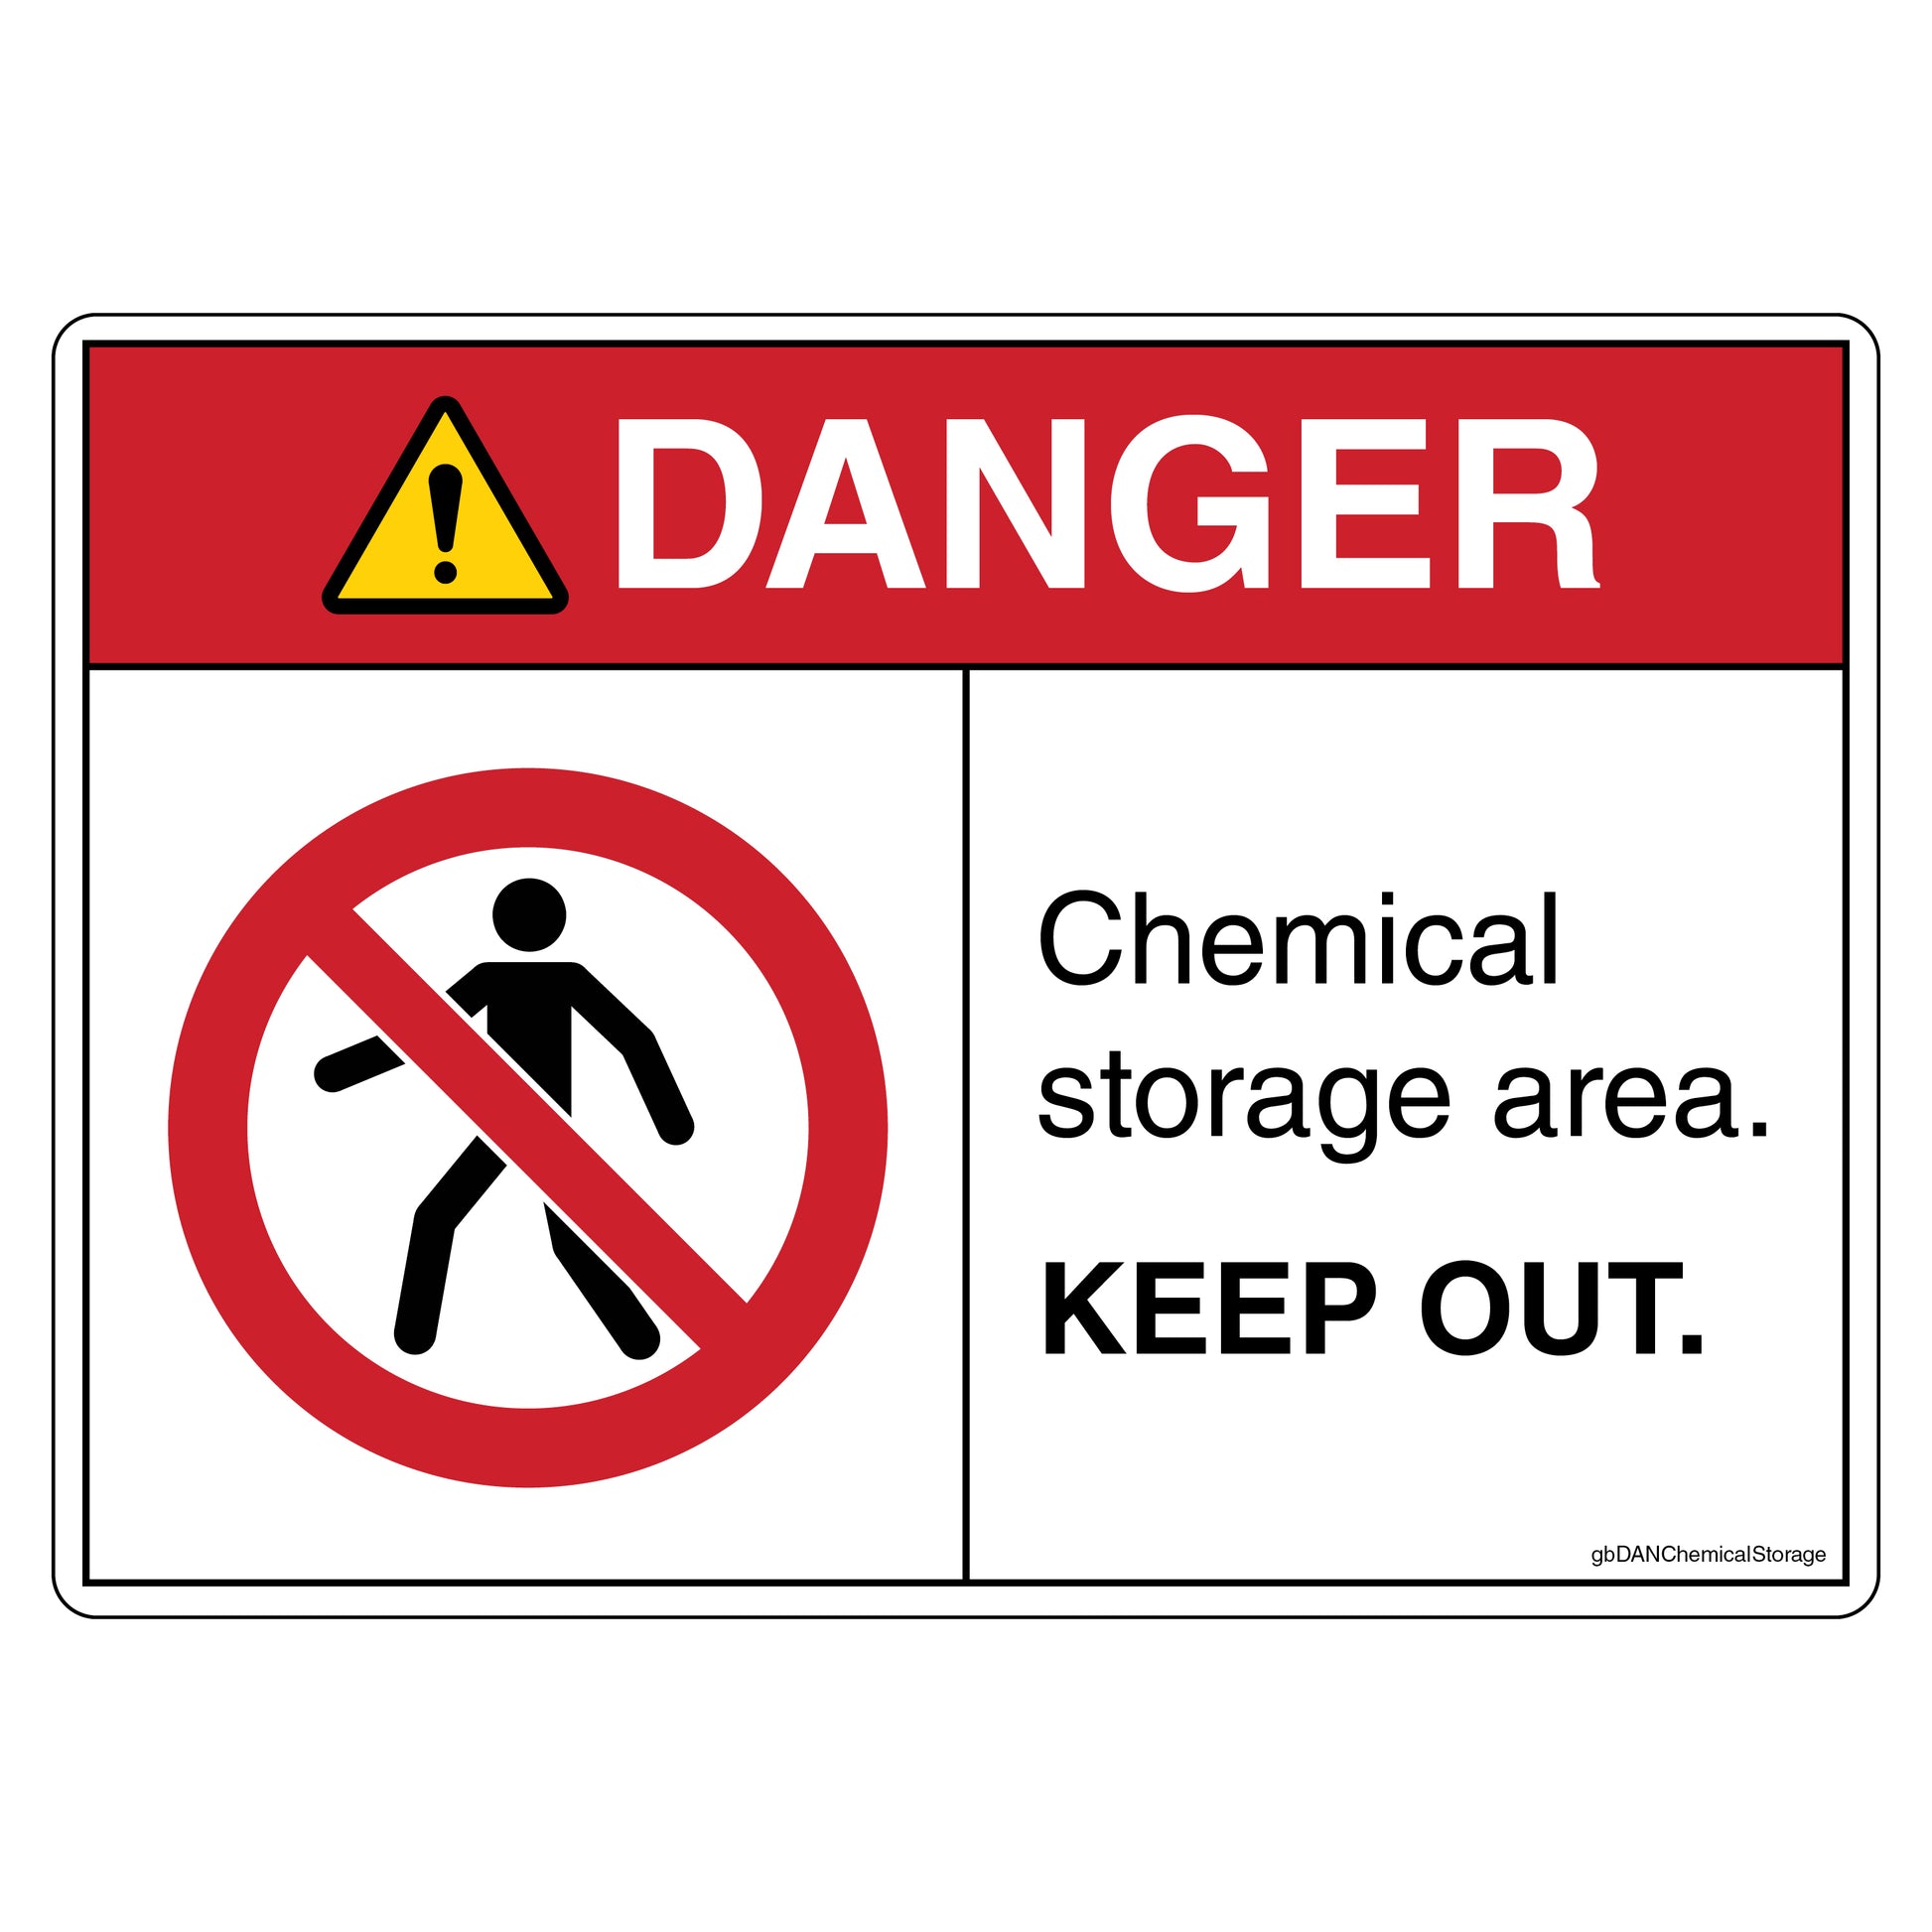 Danger Chemical Storage Area Keep Out Decal.